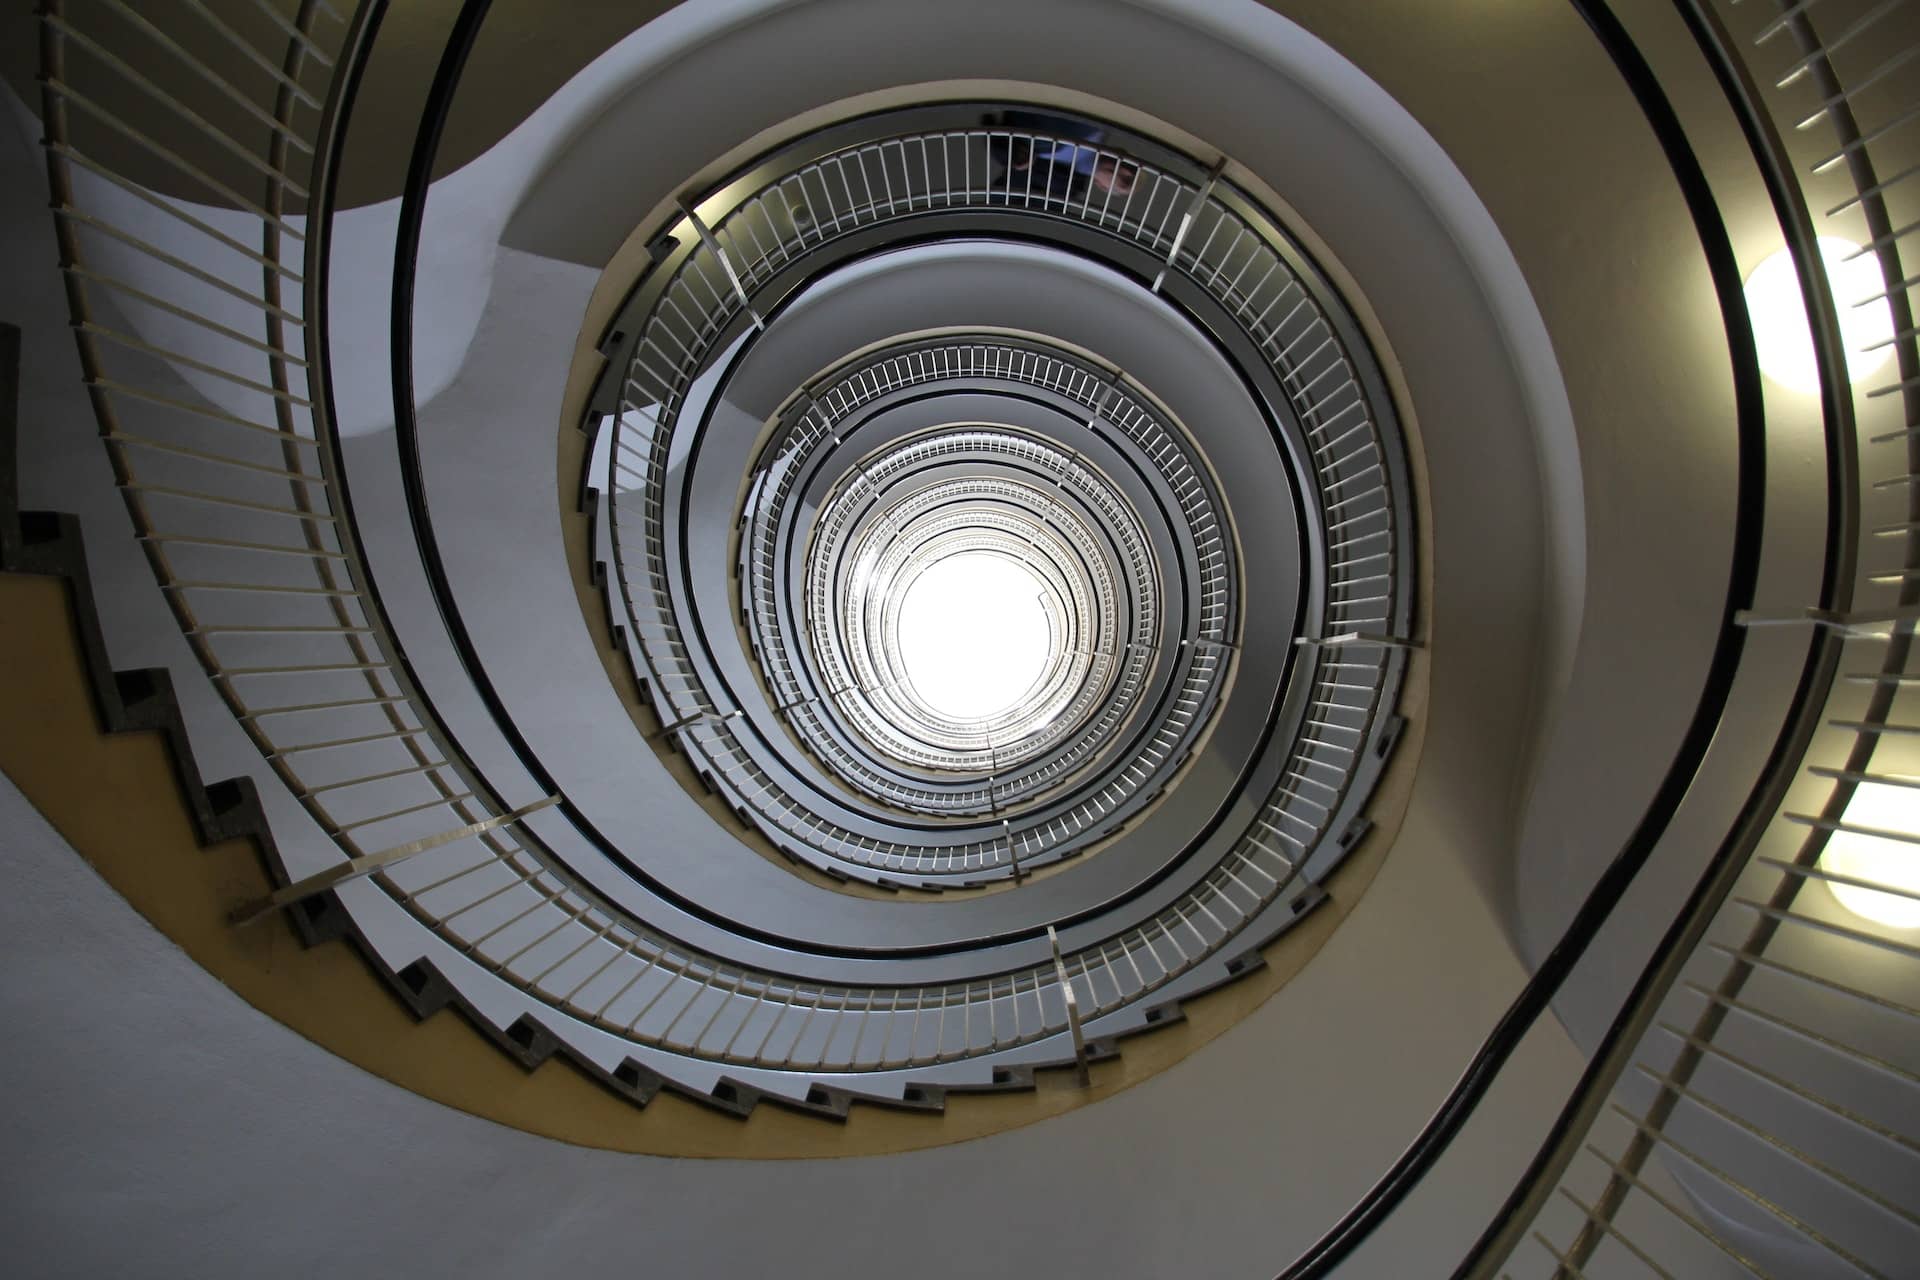 View looking up from the center of a spiral staircase.